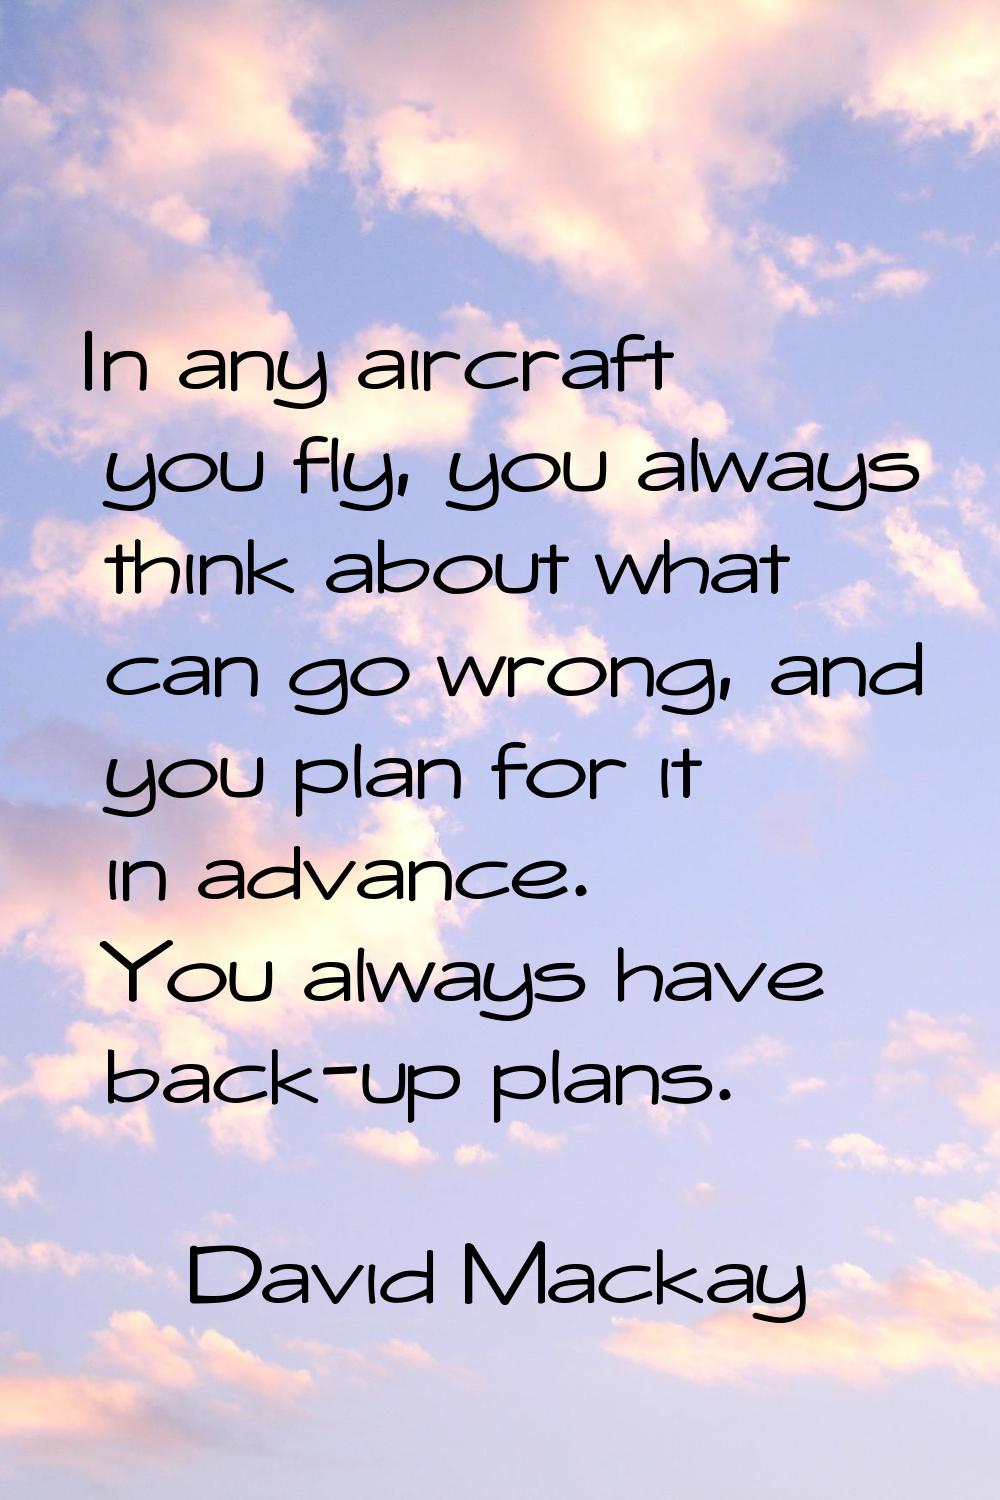 In any aircraft you fly, you always think about what can go wrong, and you plan for it in advance. 